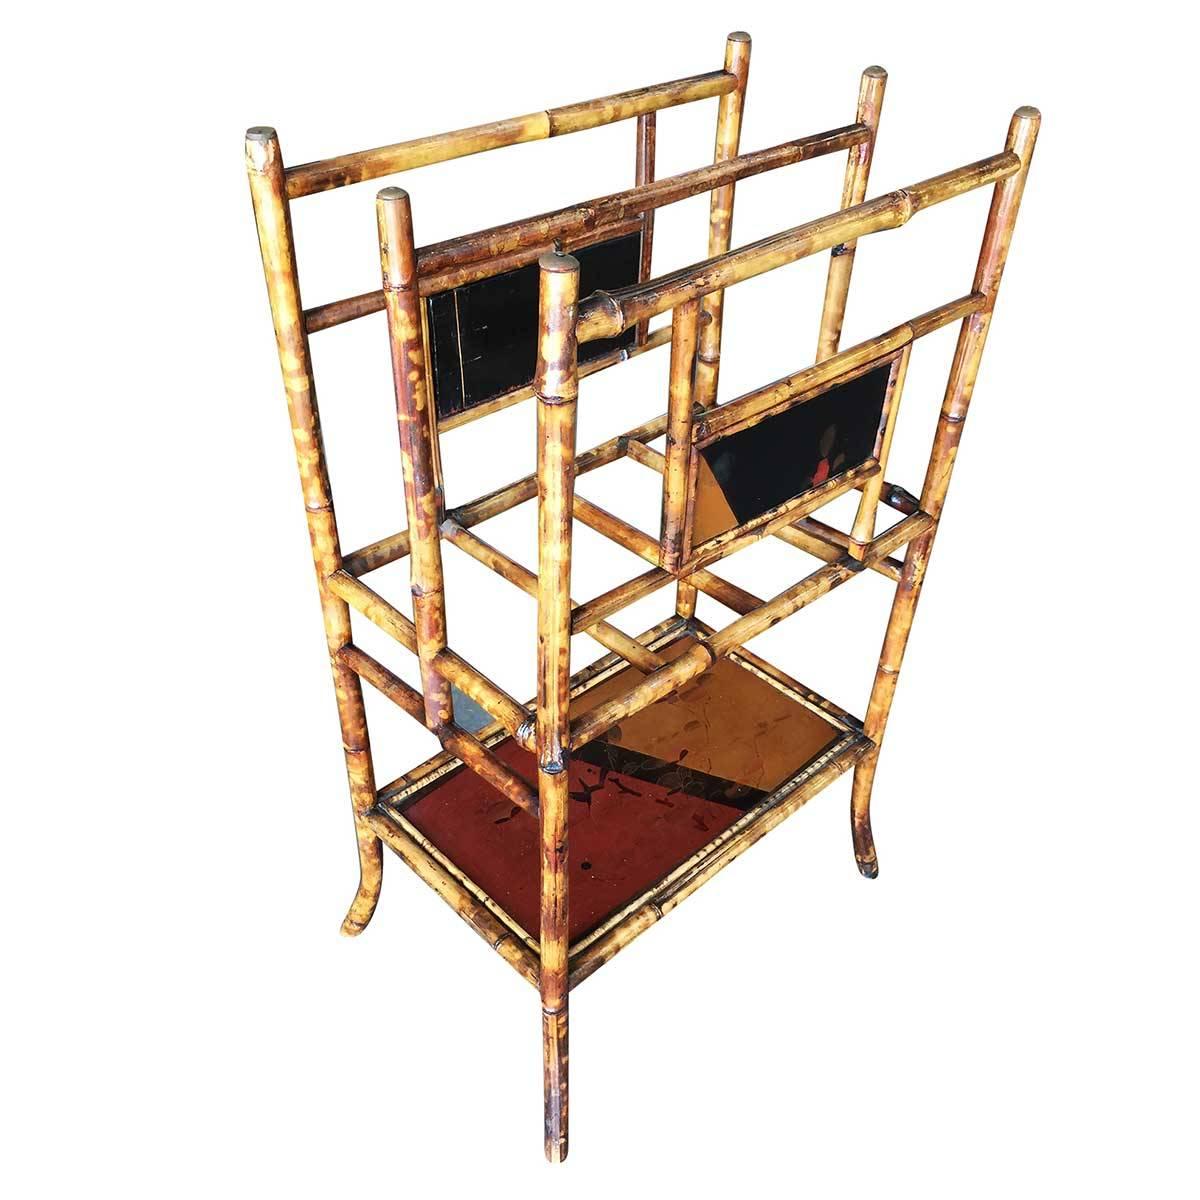 Large two-tier antique tiger bamboo magazine rack with divider and bottom shelf for larger books. Decorative hand-painted tri-colored triangle and second shelf help bring some color to this piece. 

Restored to new for you.

All rattan, bamboo and